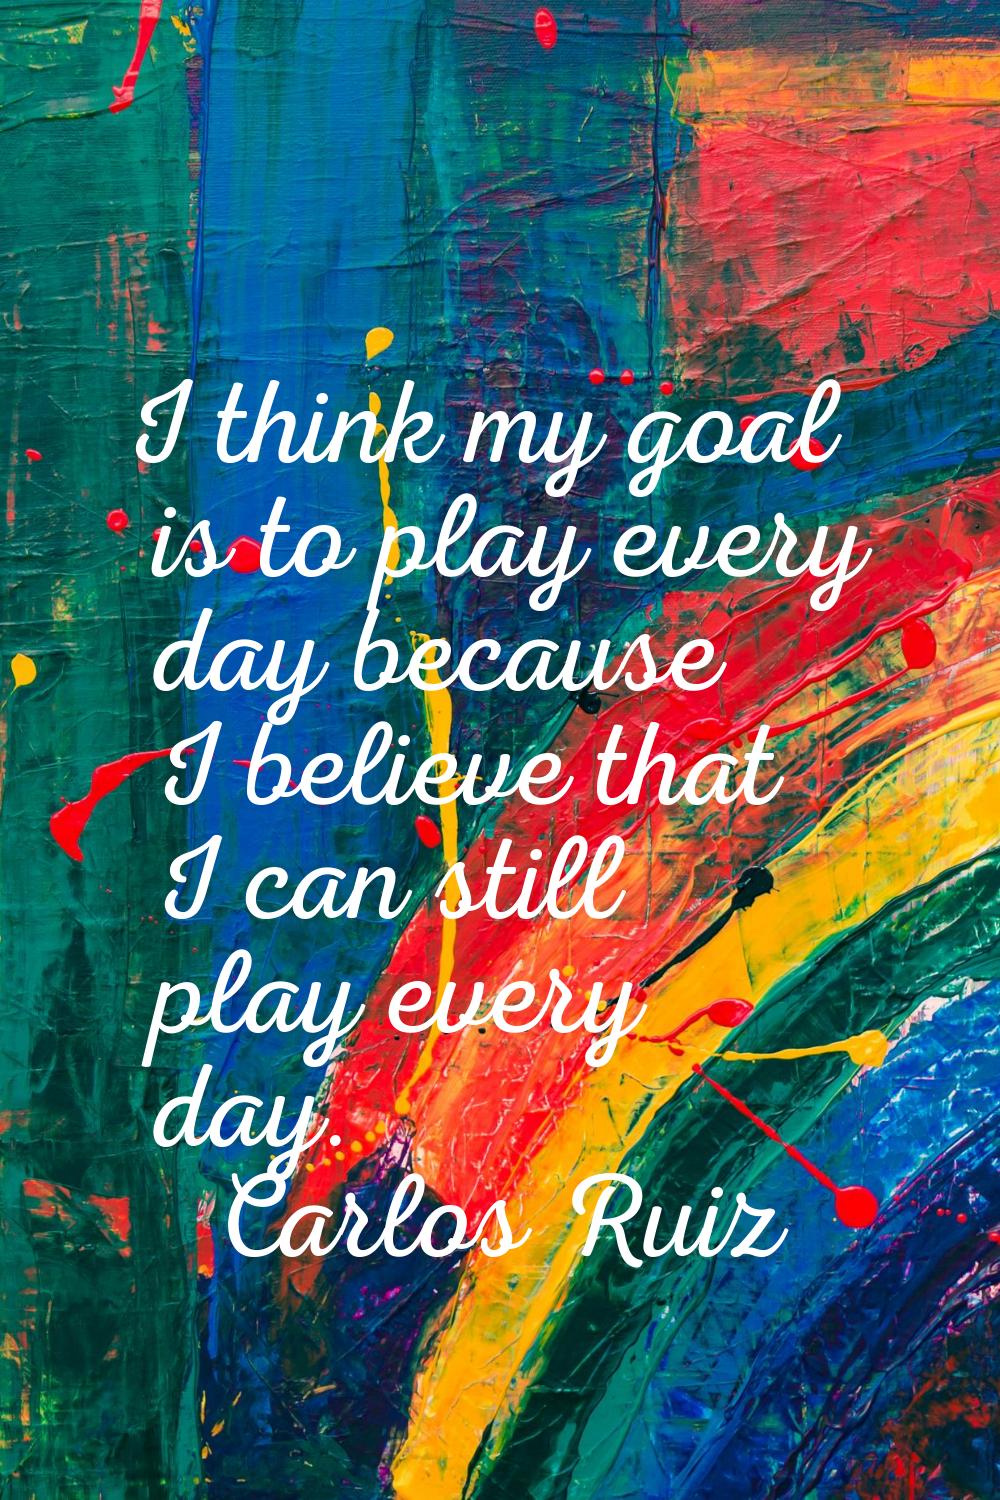 I think my goal is to play every day because I believe that I can still play every day.